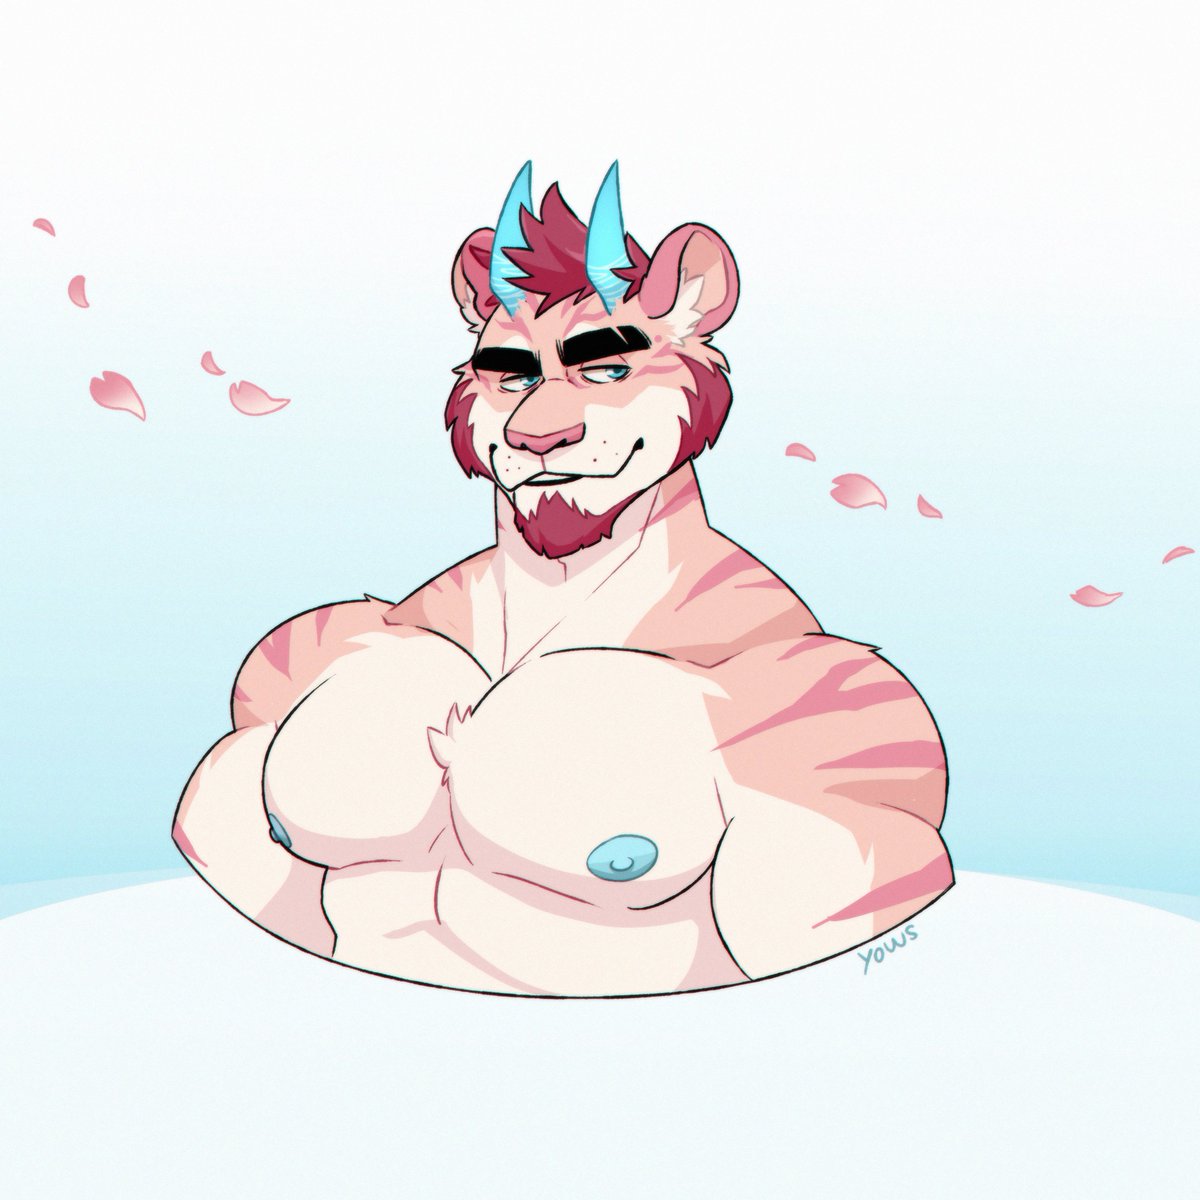 😳🌸💙 This where on my mind for a few days, I had to draw him! Still don't know what I'm going to do with this tiger, but I pretty like it💕